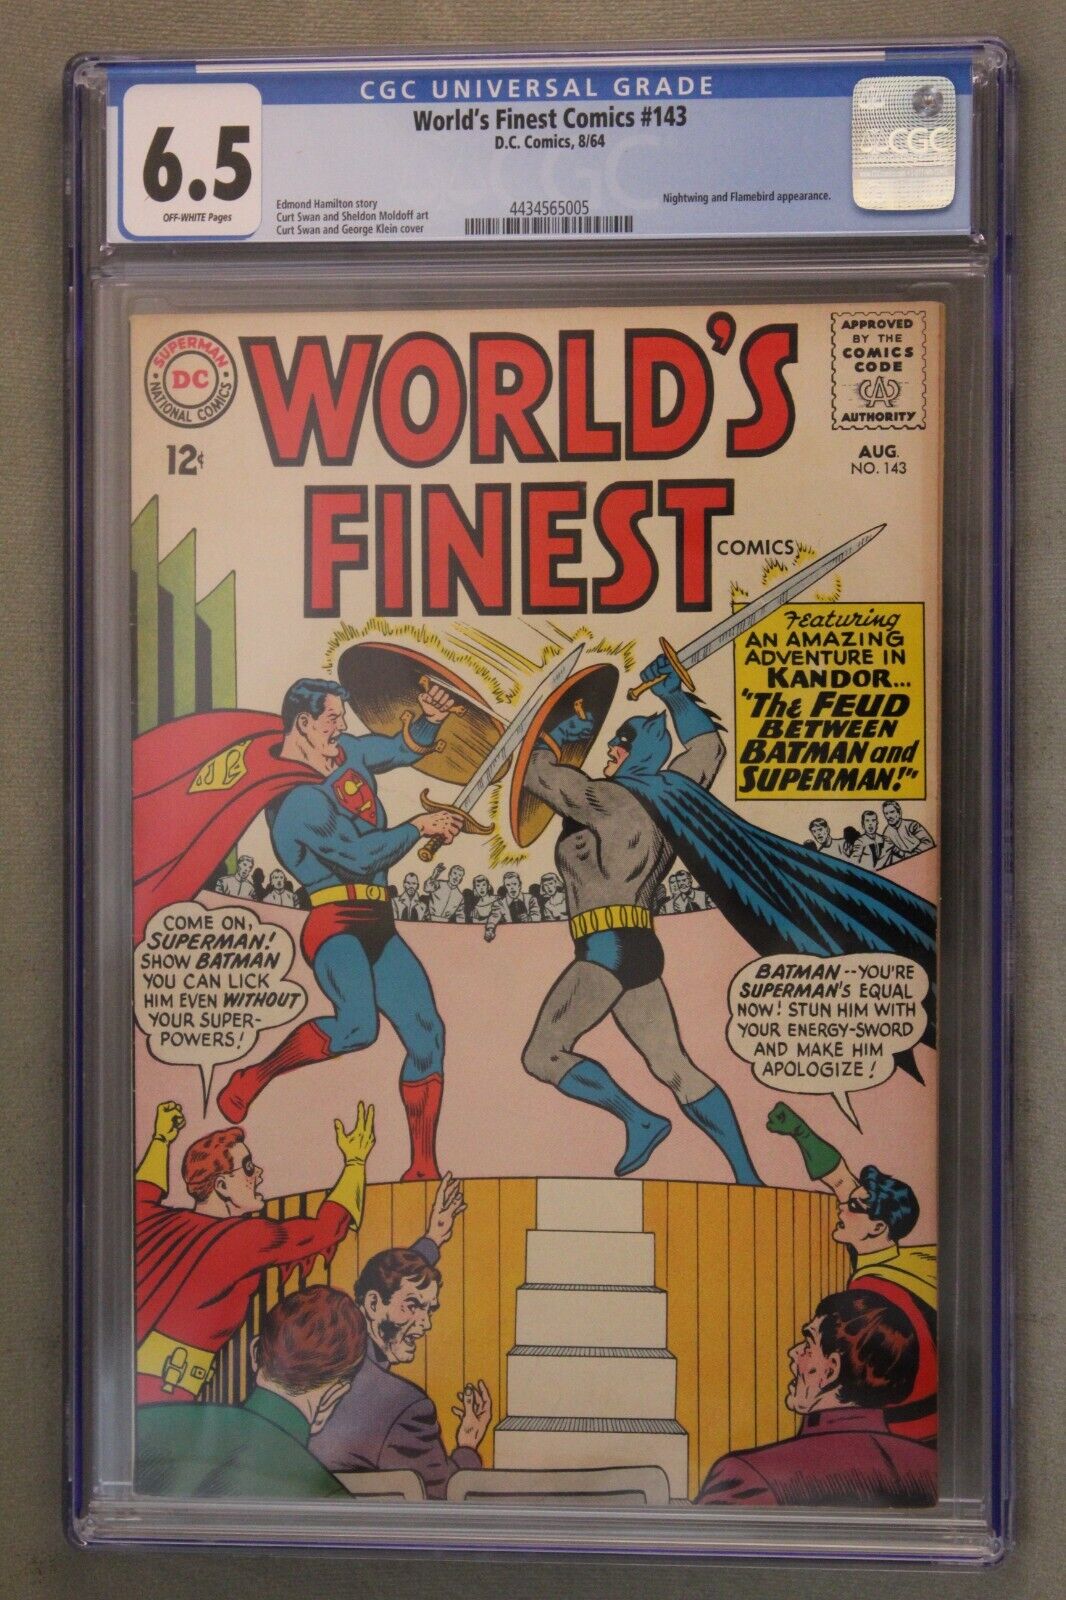 World's Finest #143 ~ D.C. Comics, 8/64 ~ CGC Graded at 6.5, Off-White Pages